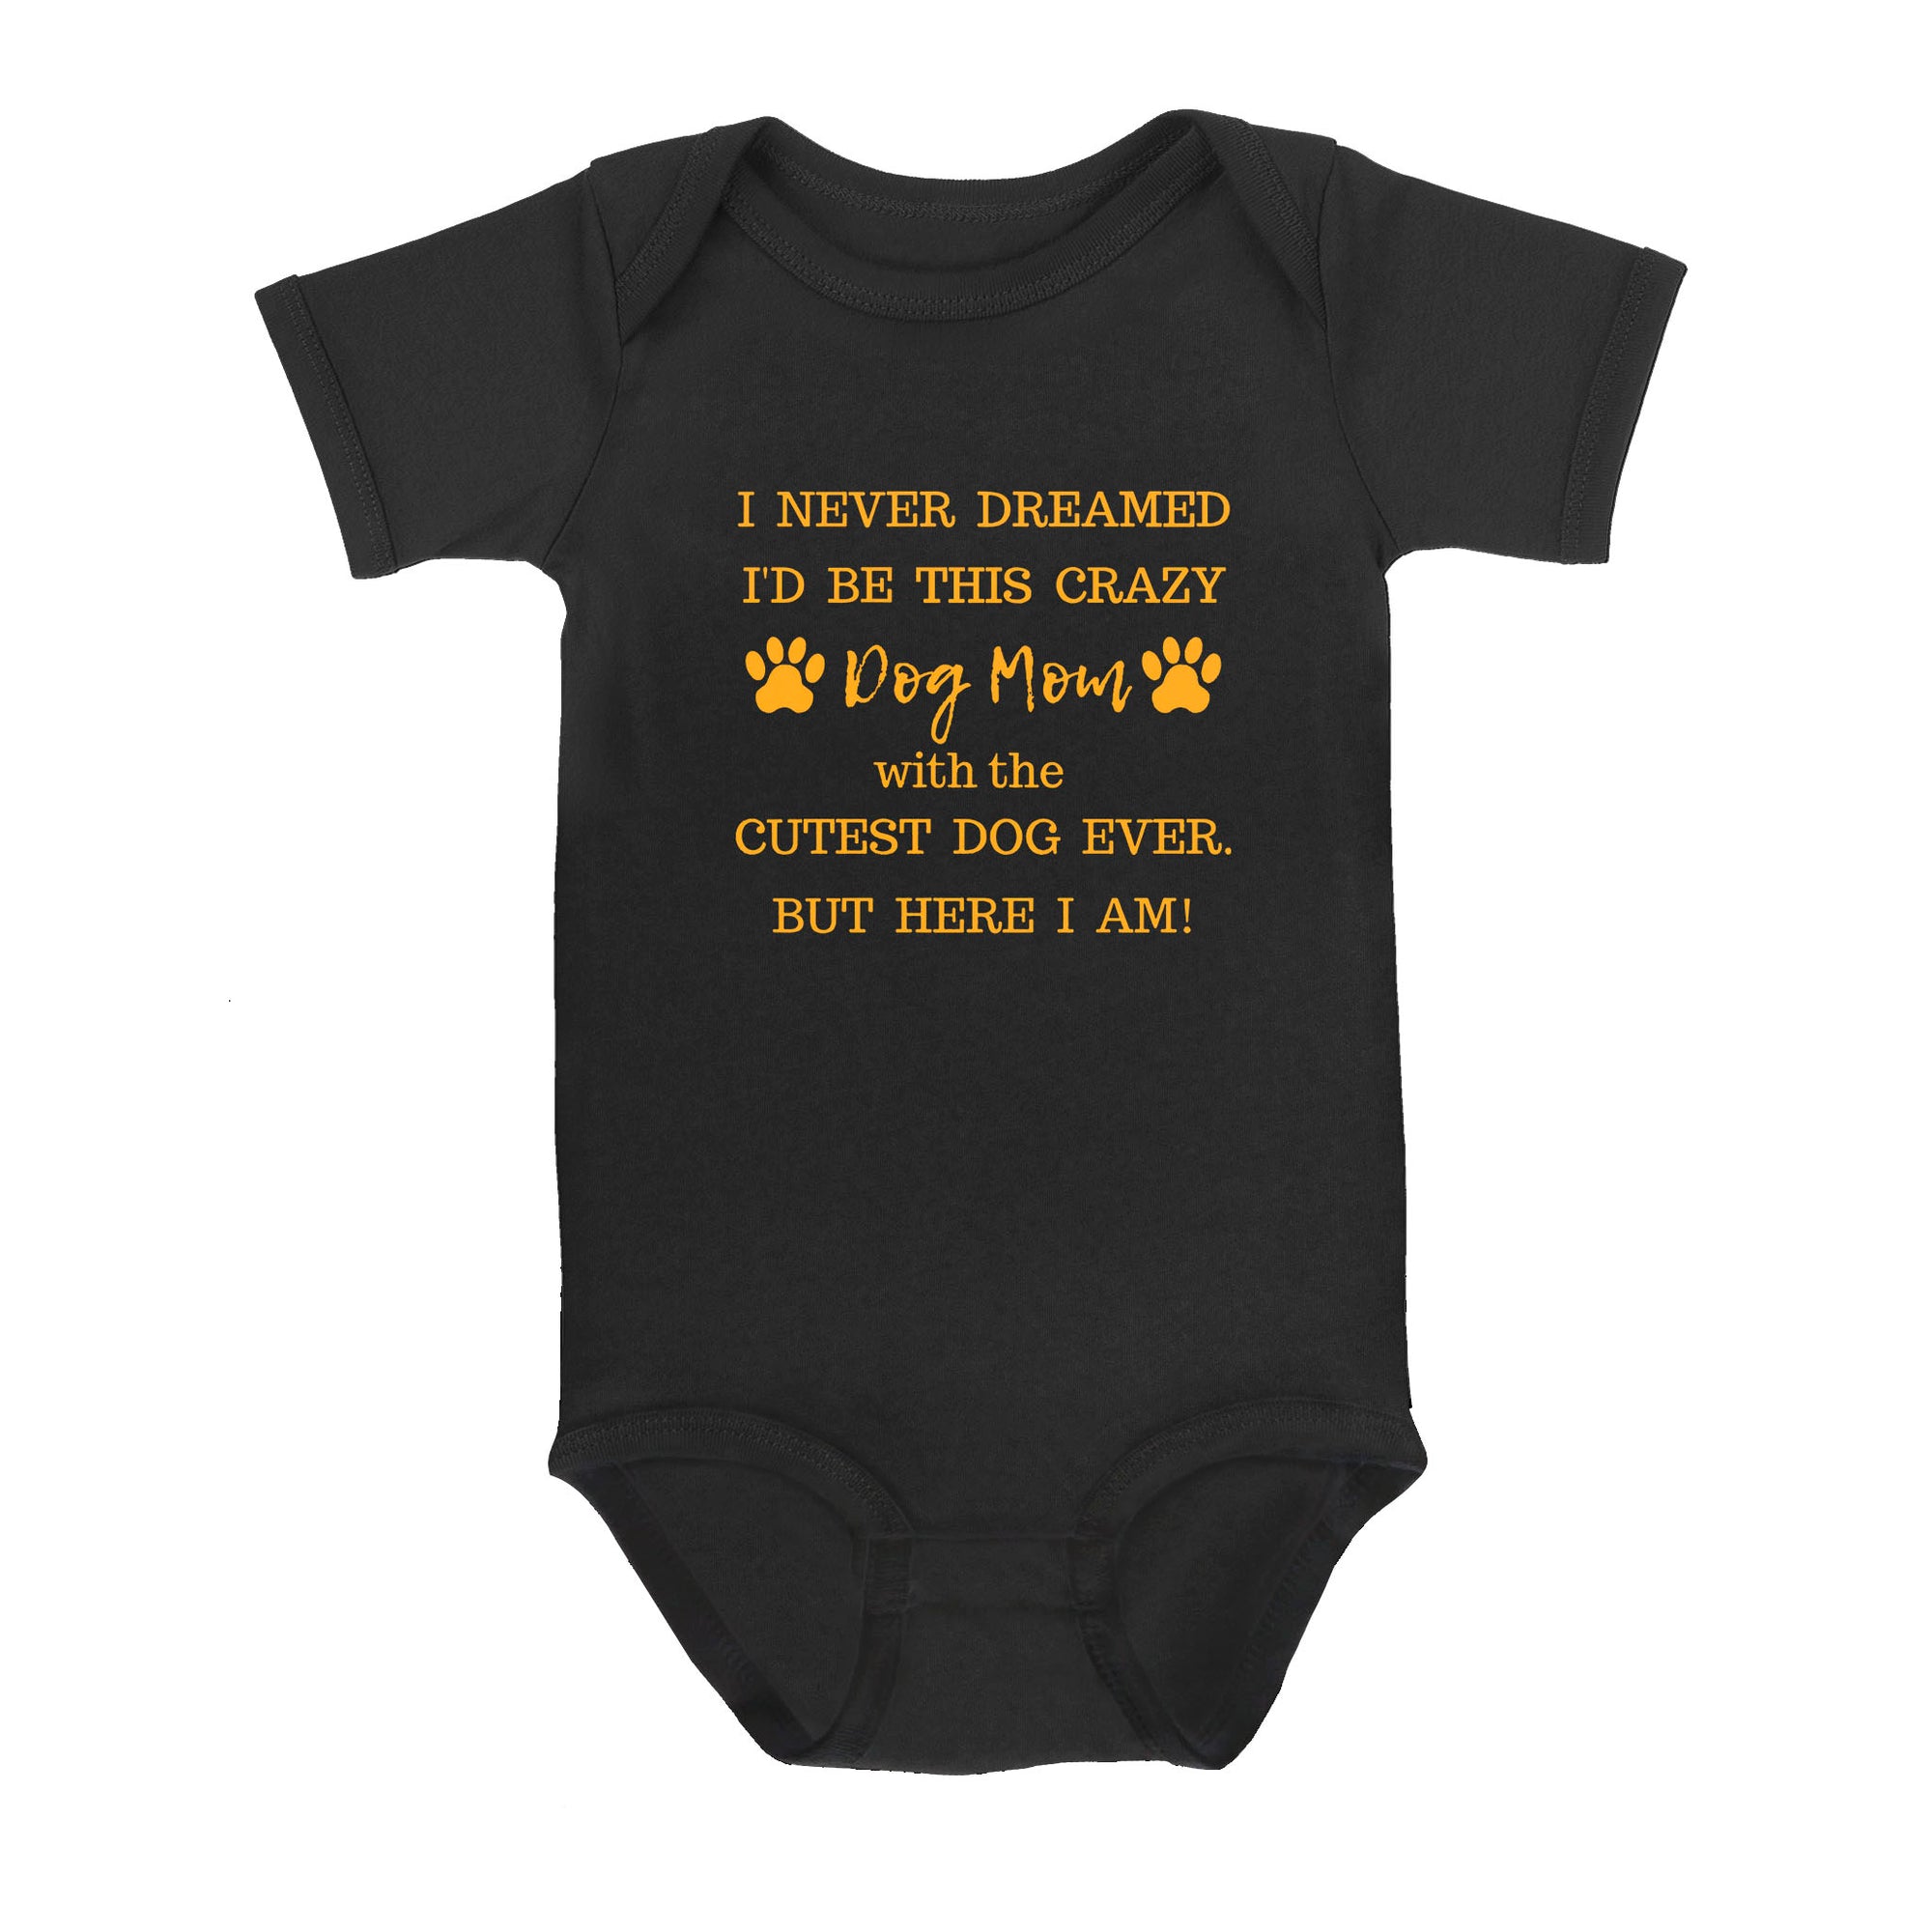 I Never Dreamed I’d Be This Crazy Dog Mom With The Cutest Dogs Ever - Baby Onesie